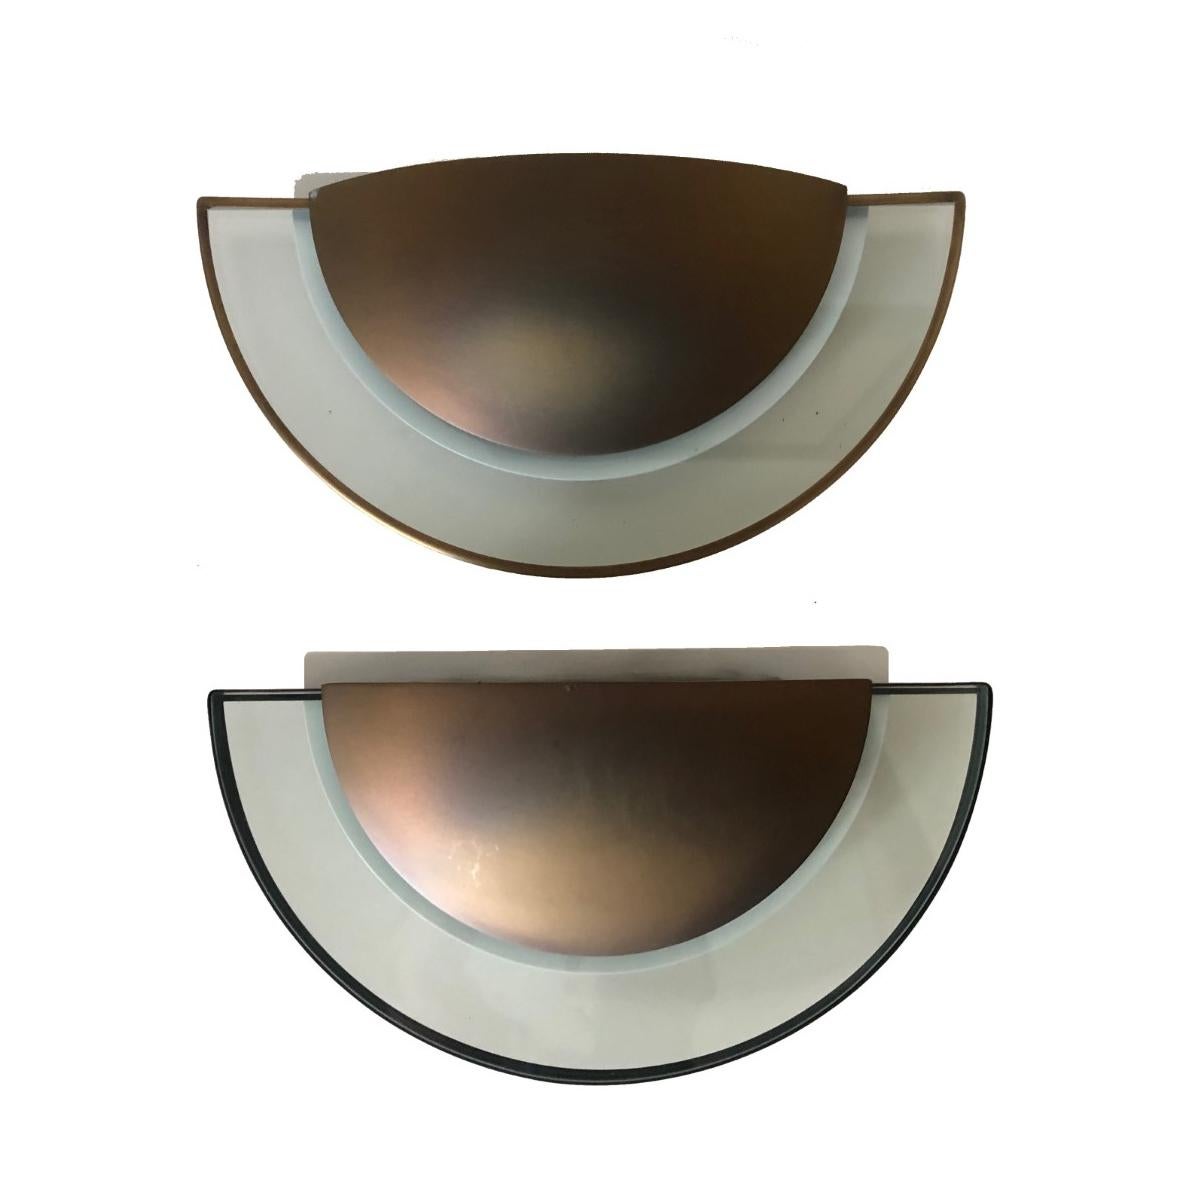 Postmodern and stunning set of two metal and glass wall sconces. These wall sconces were made in Barcelona (Spain) by Estiluz during 1980s.
The Estiluz design studio led by Leonardo Marelli was created in 1969.
“Estiluz” original sticker label